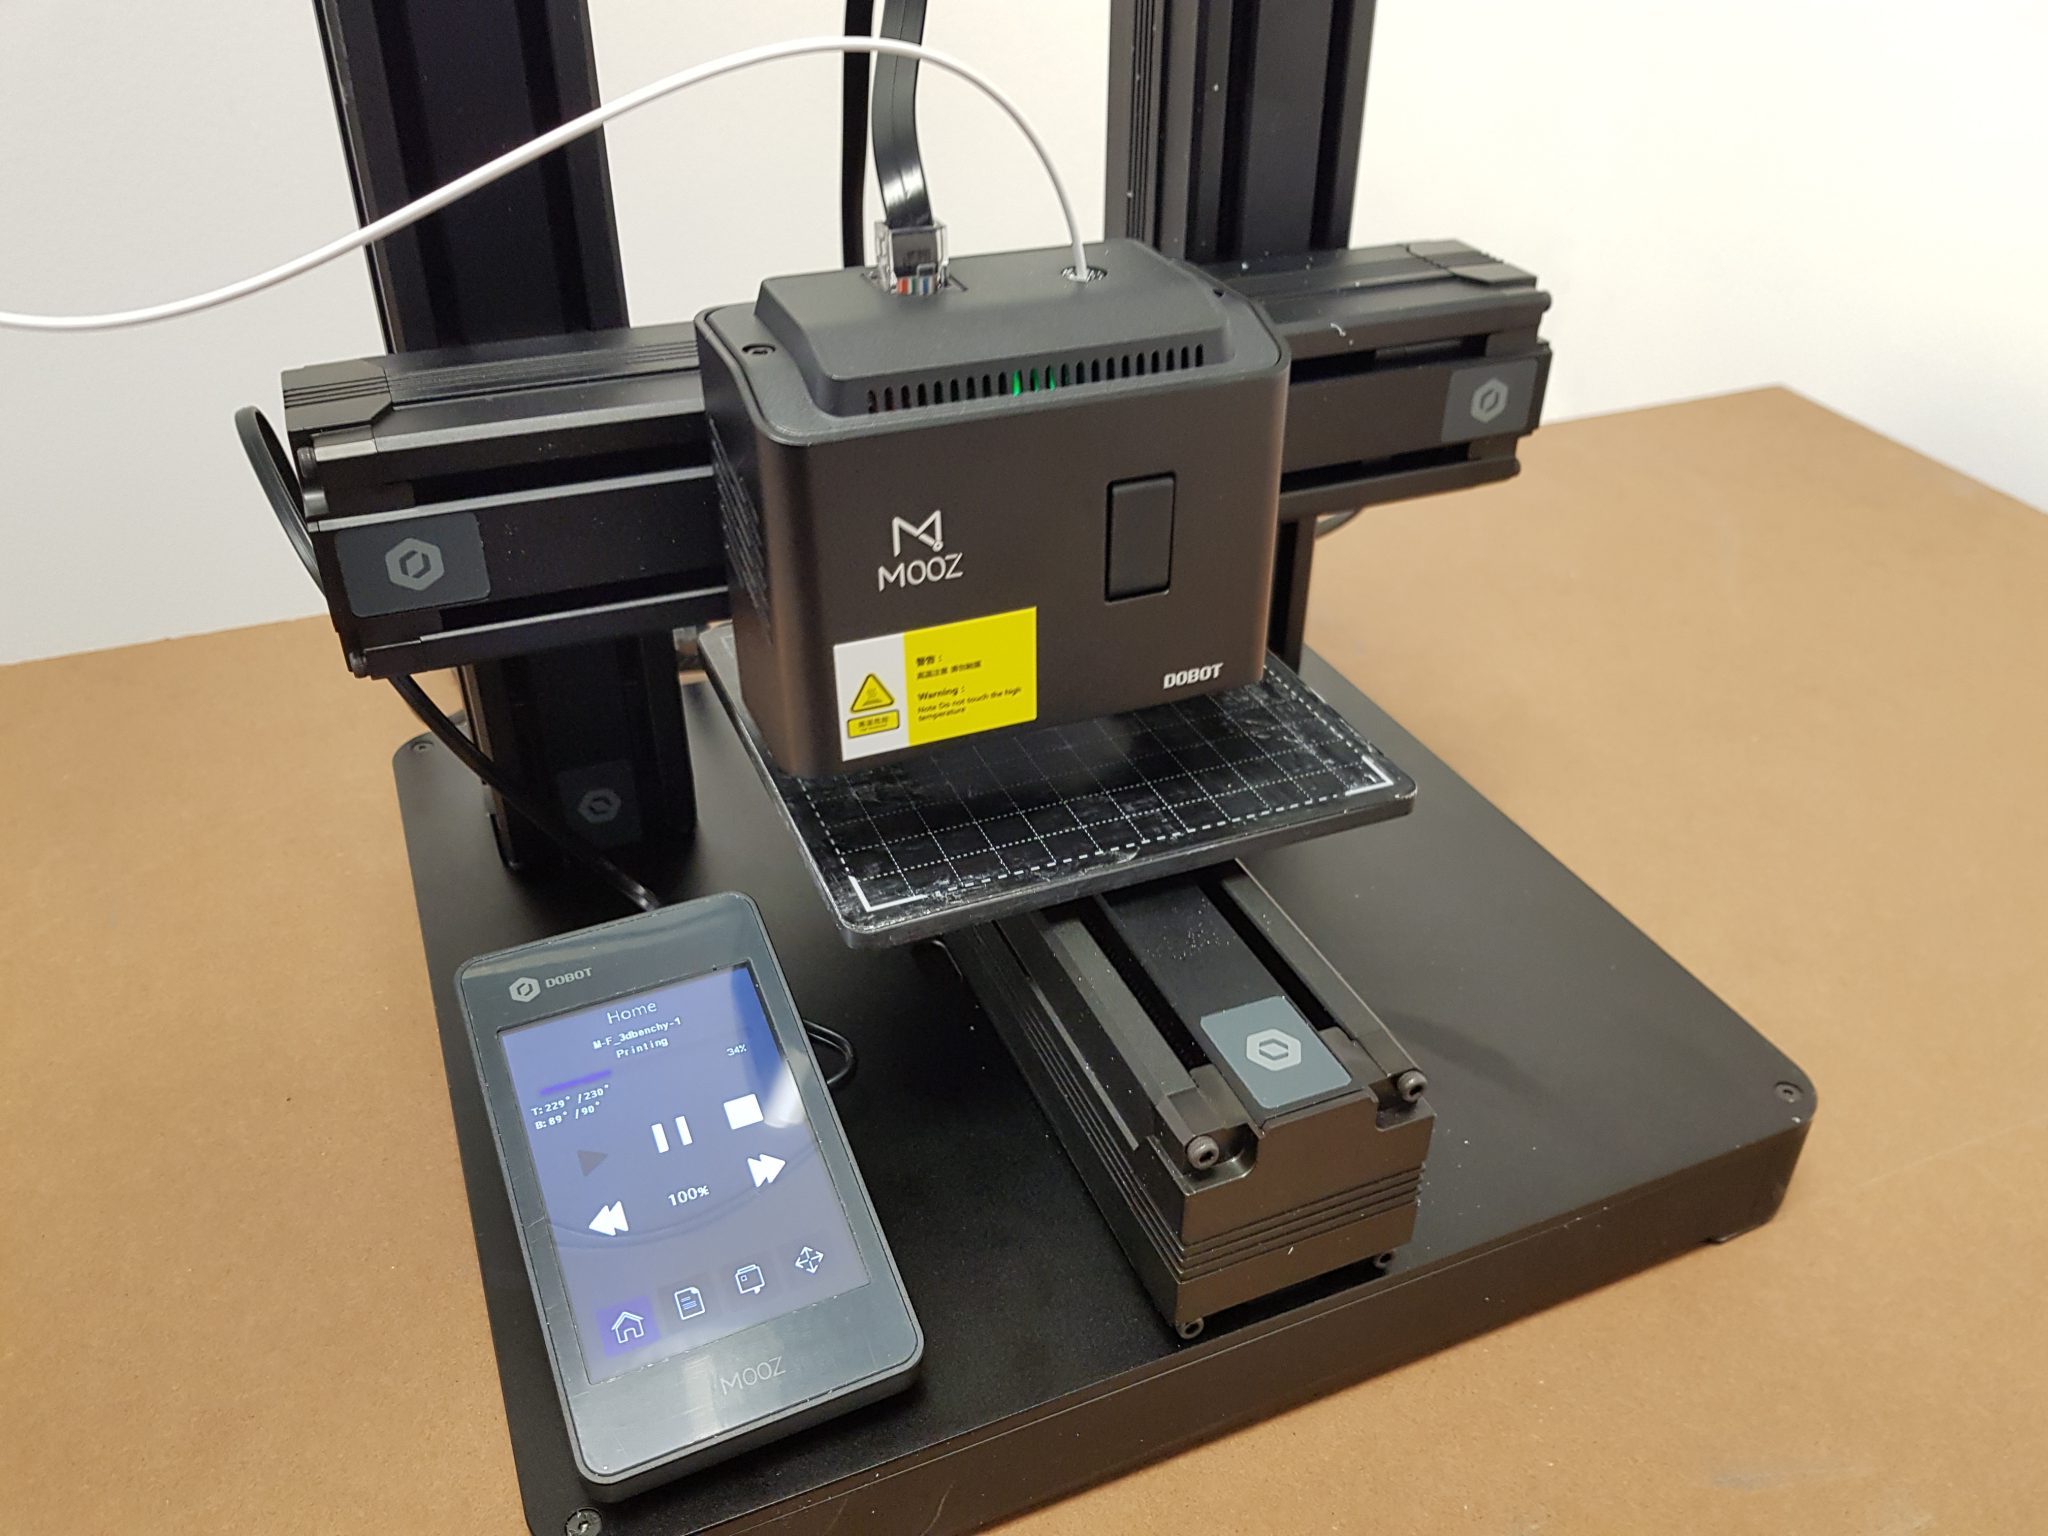 Review: The DOBOT MOOZ 3D printer, laser and CNC - Printing Industry